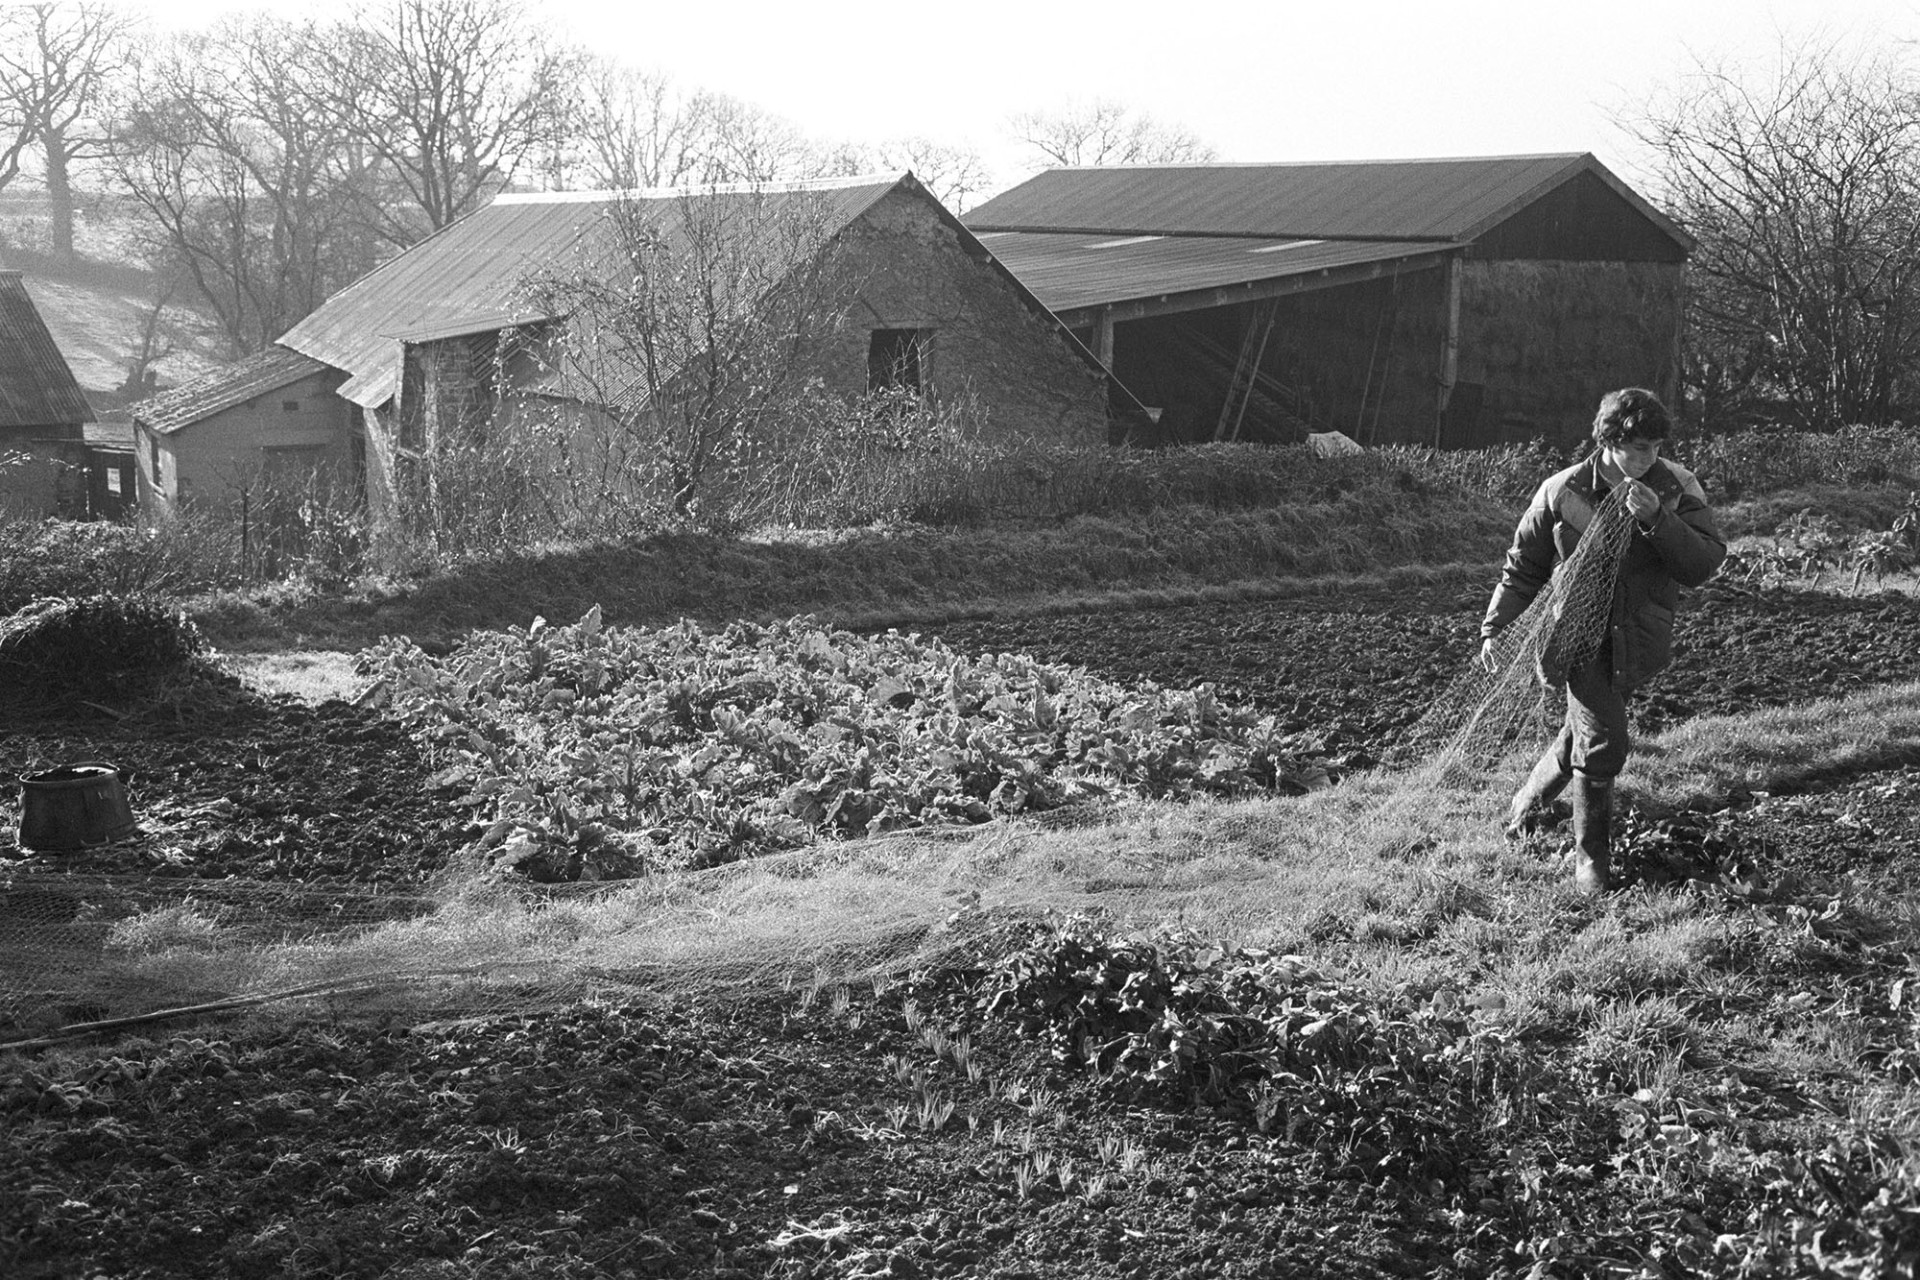 Farmer putting nets over vegetables to keep birds off. Barns behind.
[A man netting cabbage plants in a garden at Lower Langham, Dolton, to protect them from birds.  Barns and farm buildings are visible in the background.]